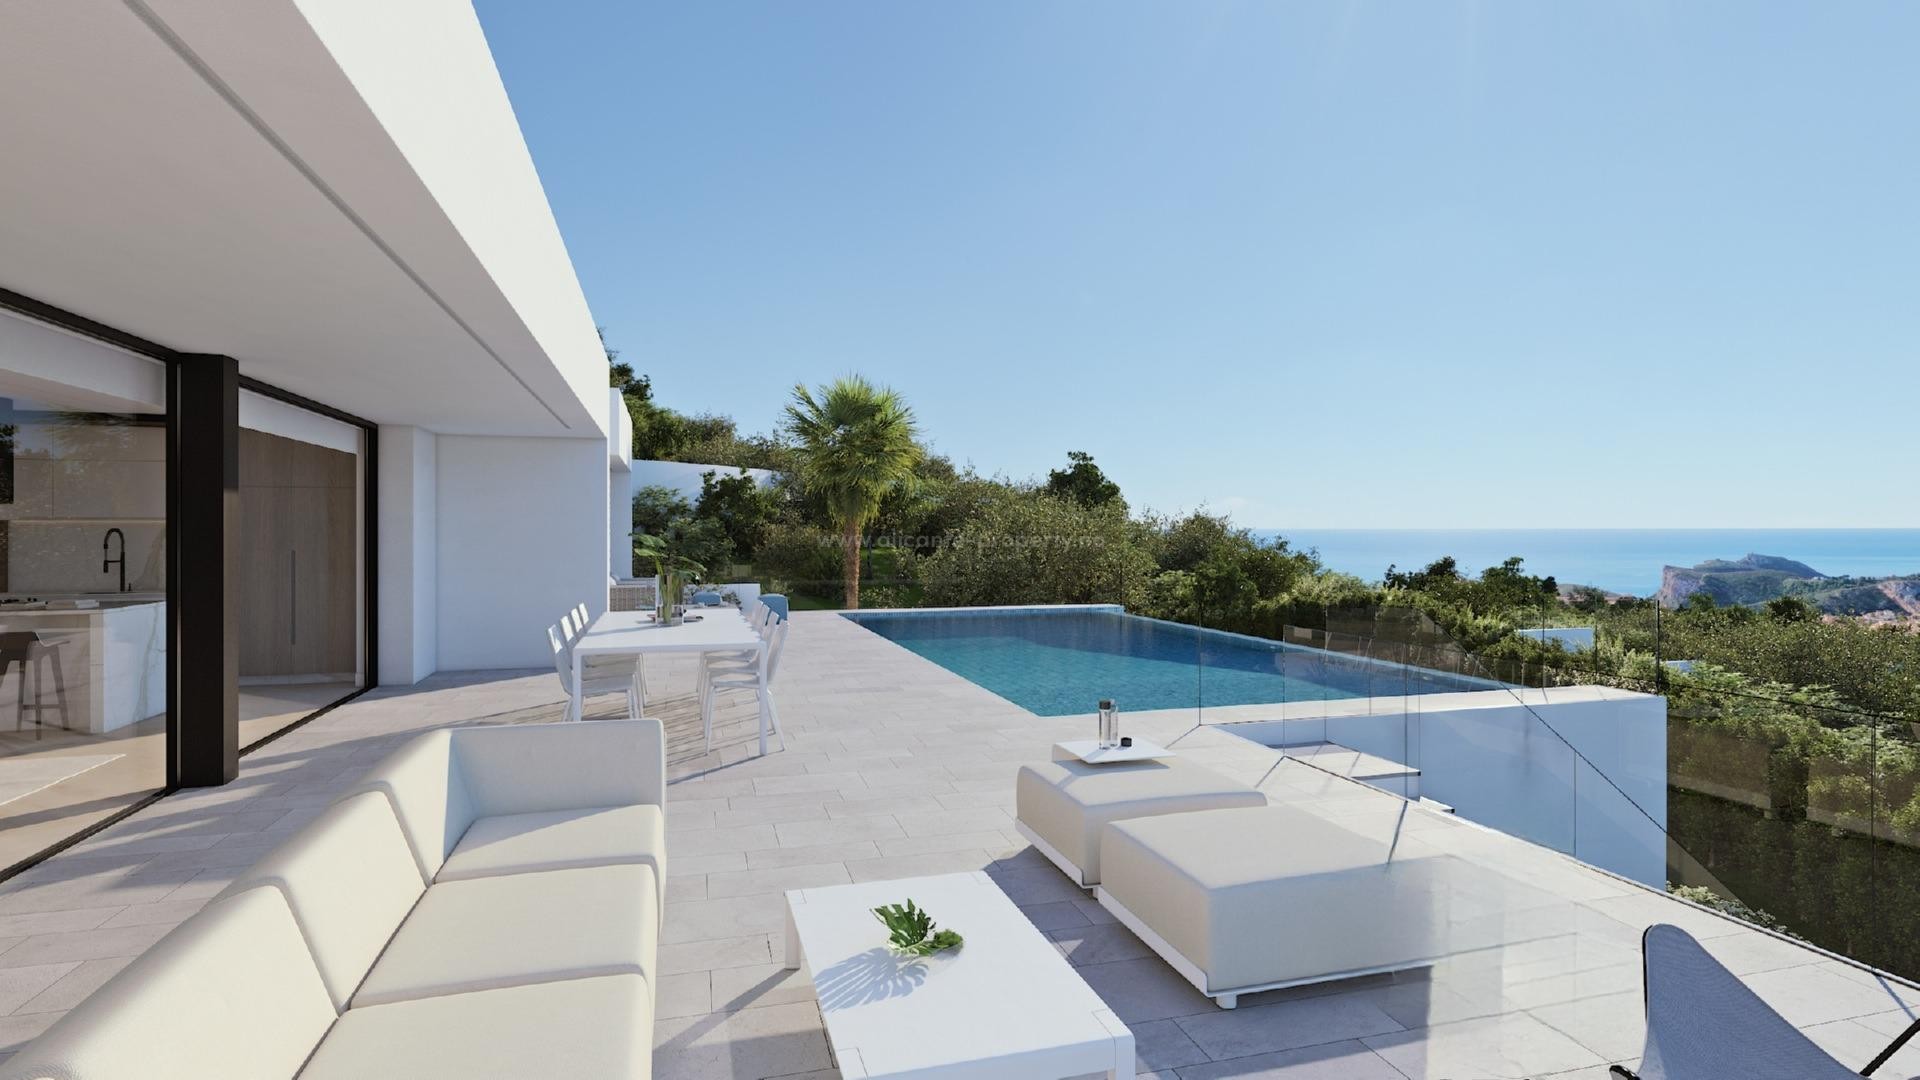 Modern new built luxury villa in Benitachell, 3 bedrooms, 5 bathrooms, parking for 4 cars, large infinity pool, 1300 square meter pl